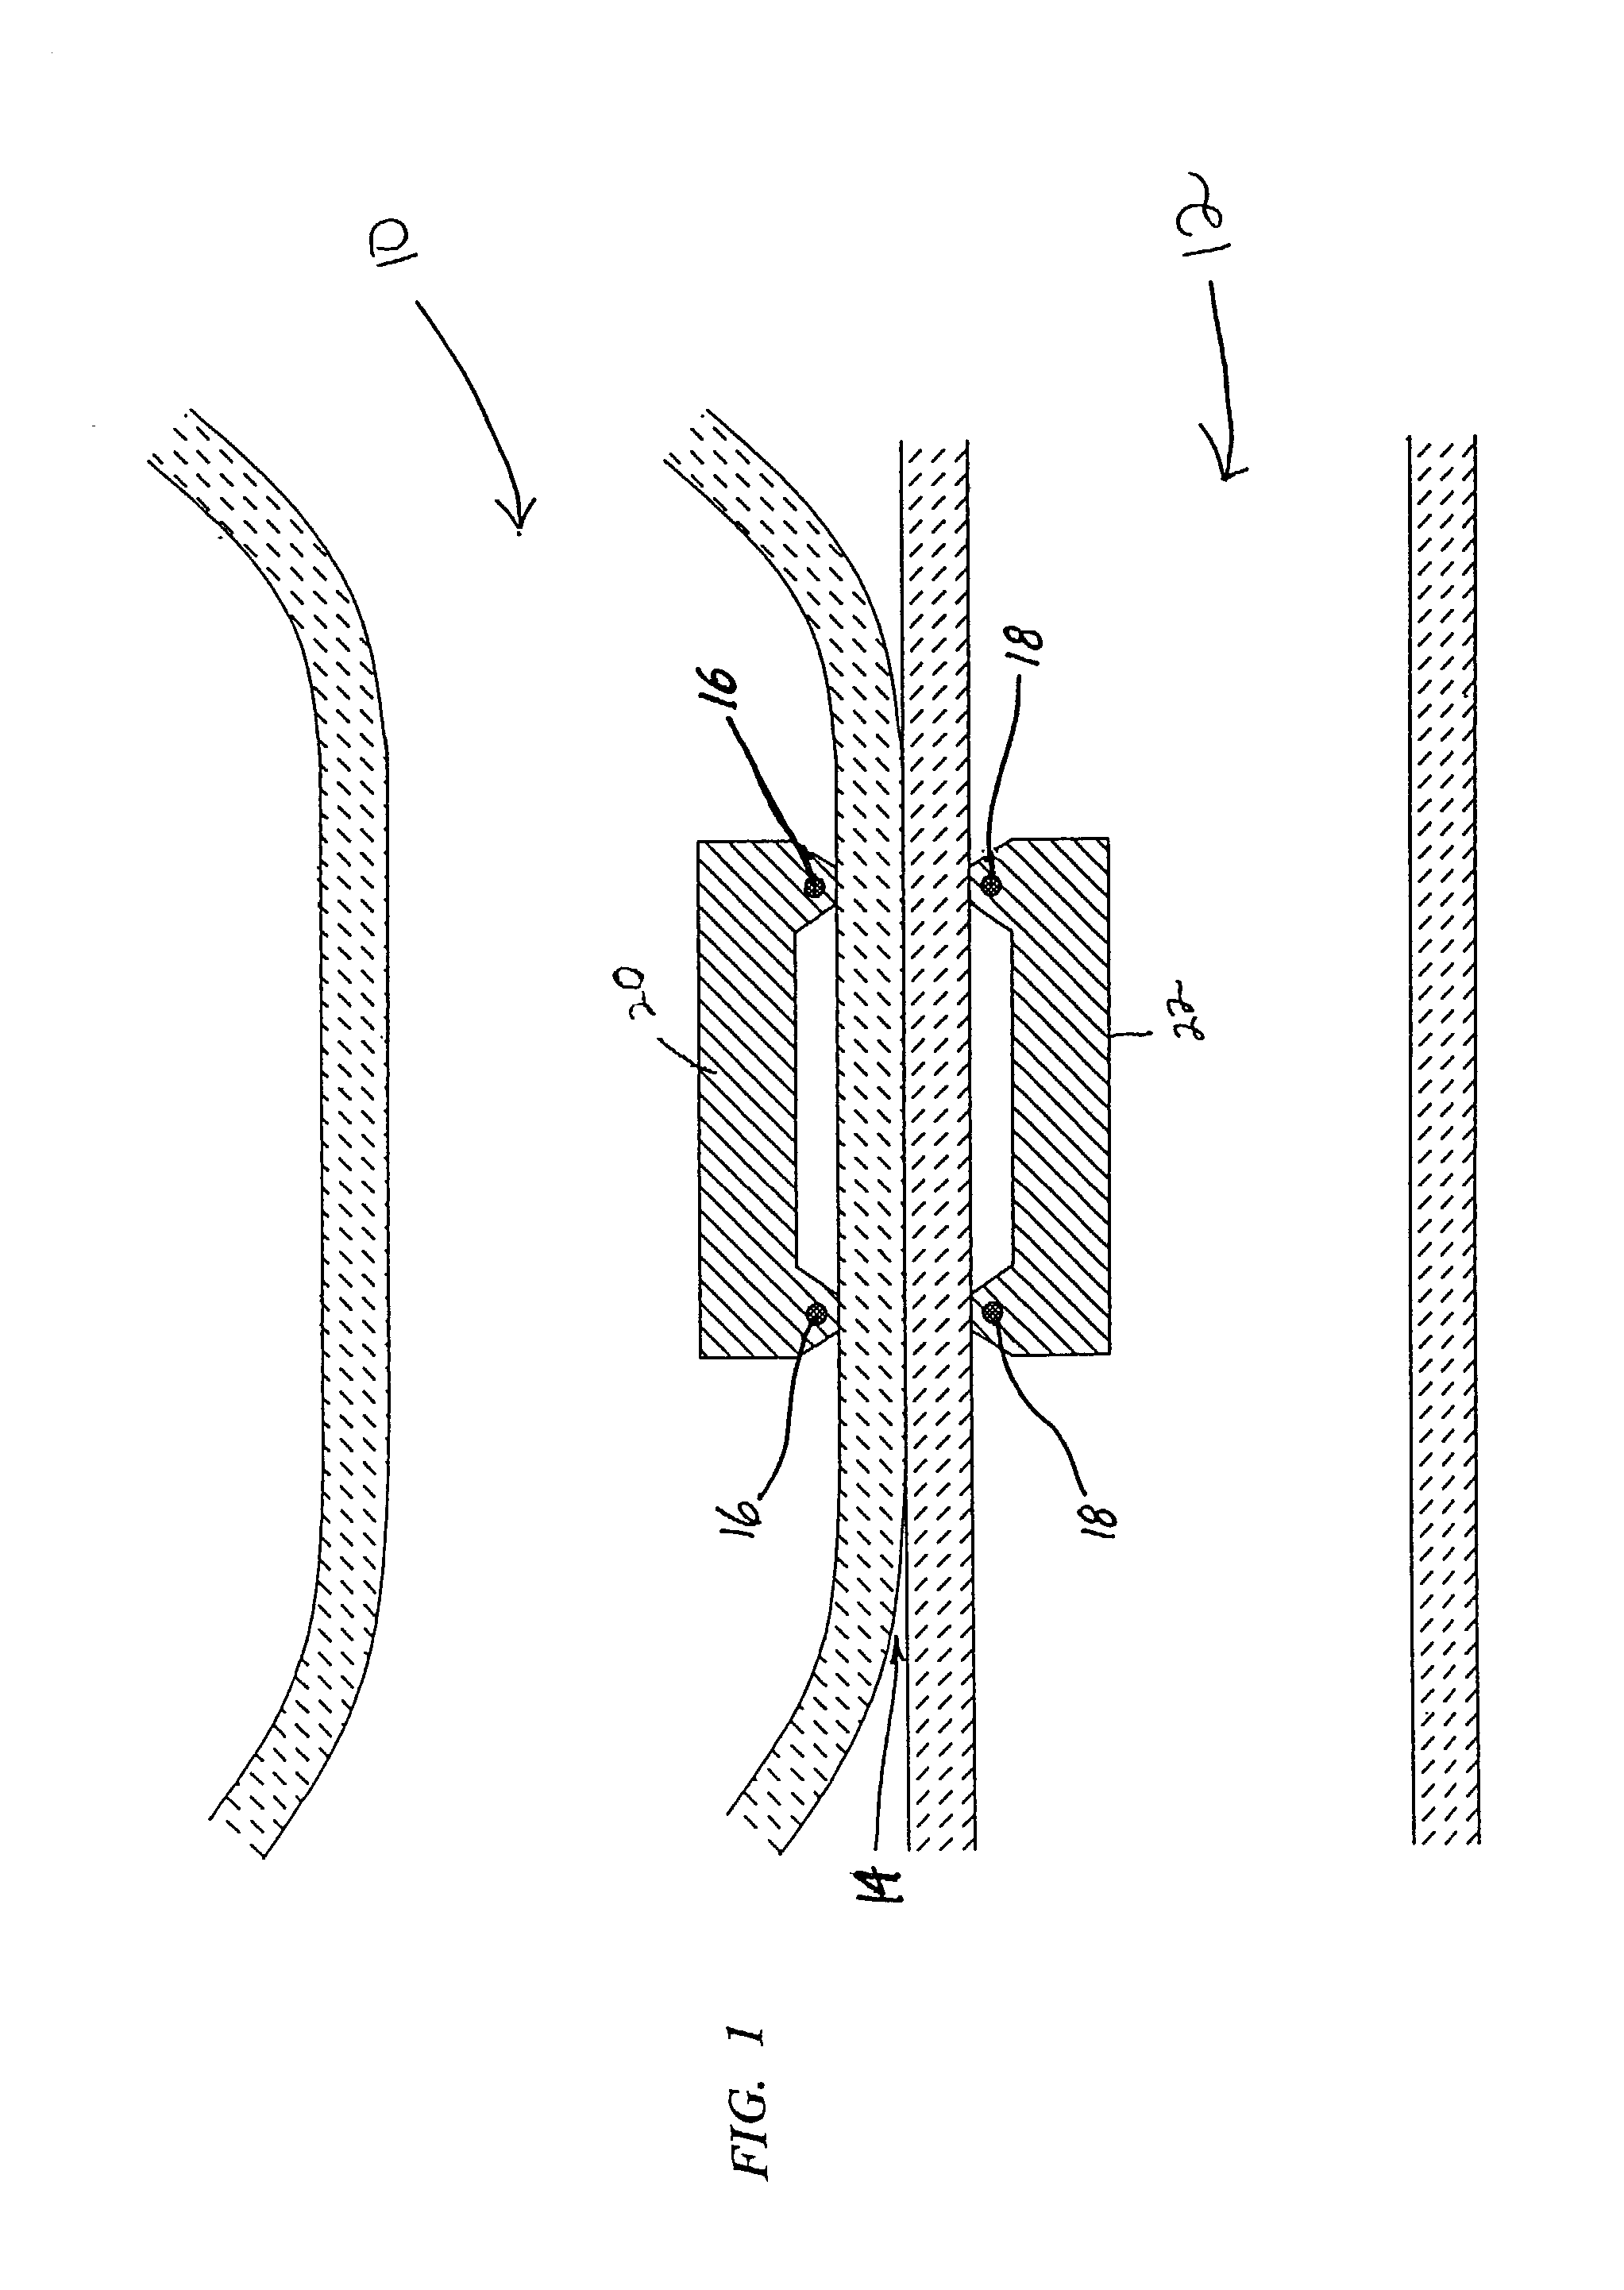 Anastomosis system and related Methods